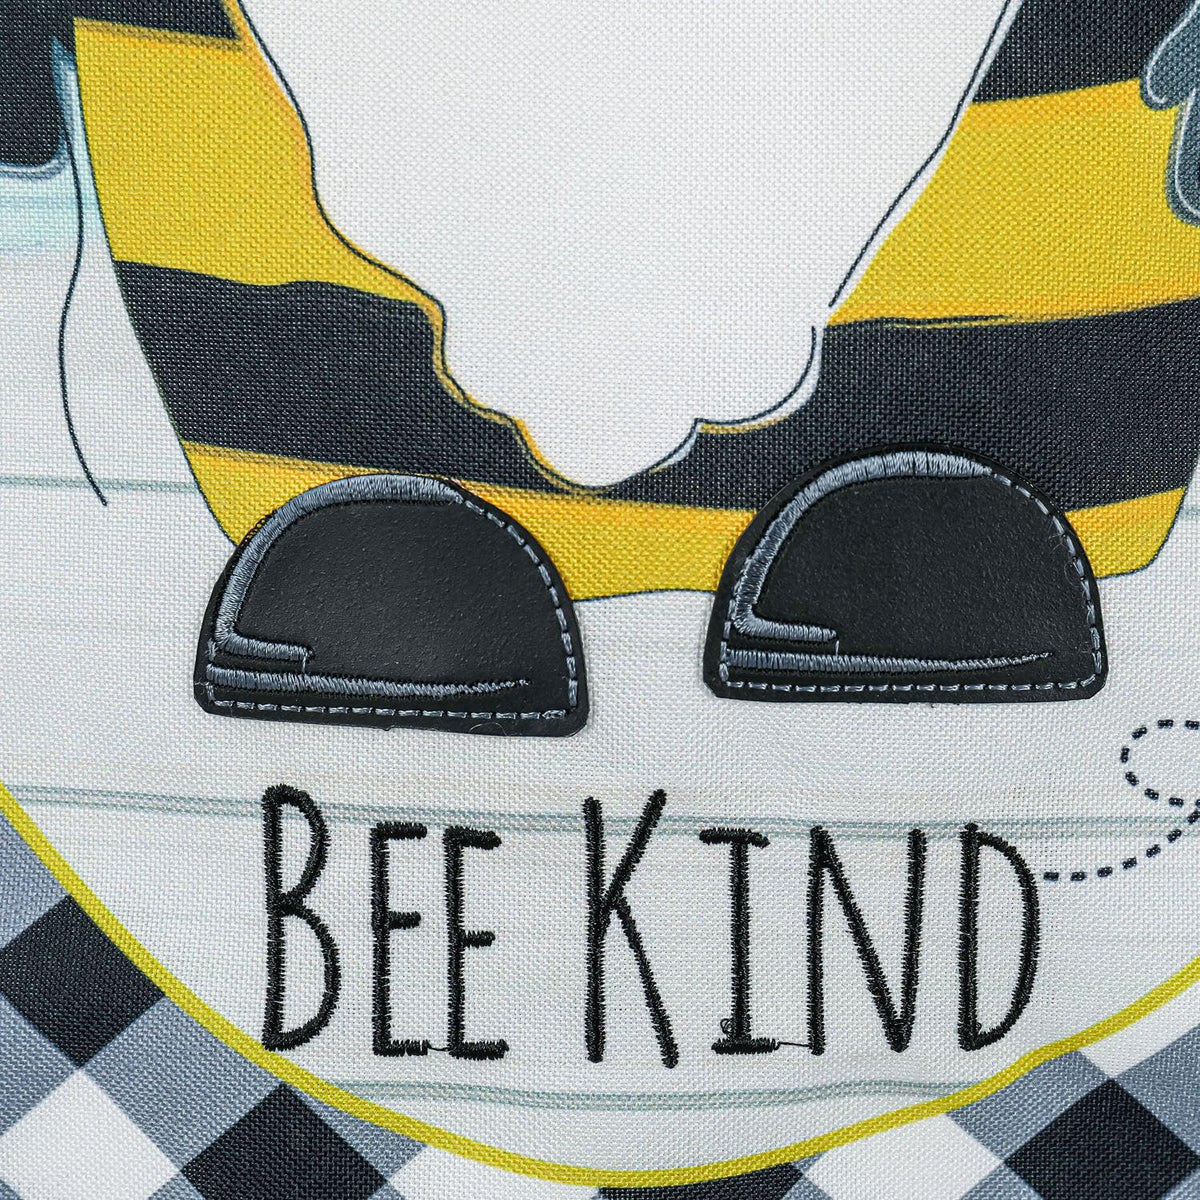 The Bee Humble Bee Kind Gnome house banner features a gnome in a bee costume, a black checked border, and the words "Bee Humble Bee Kind". 